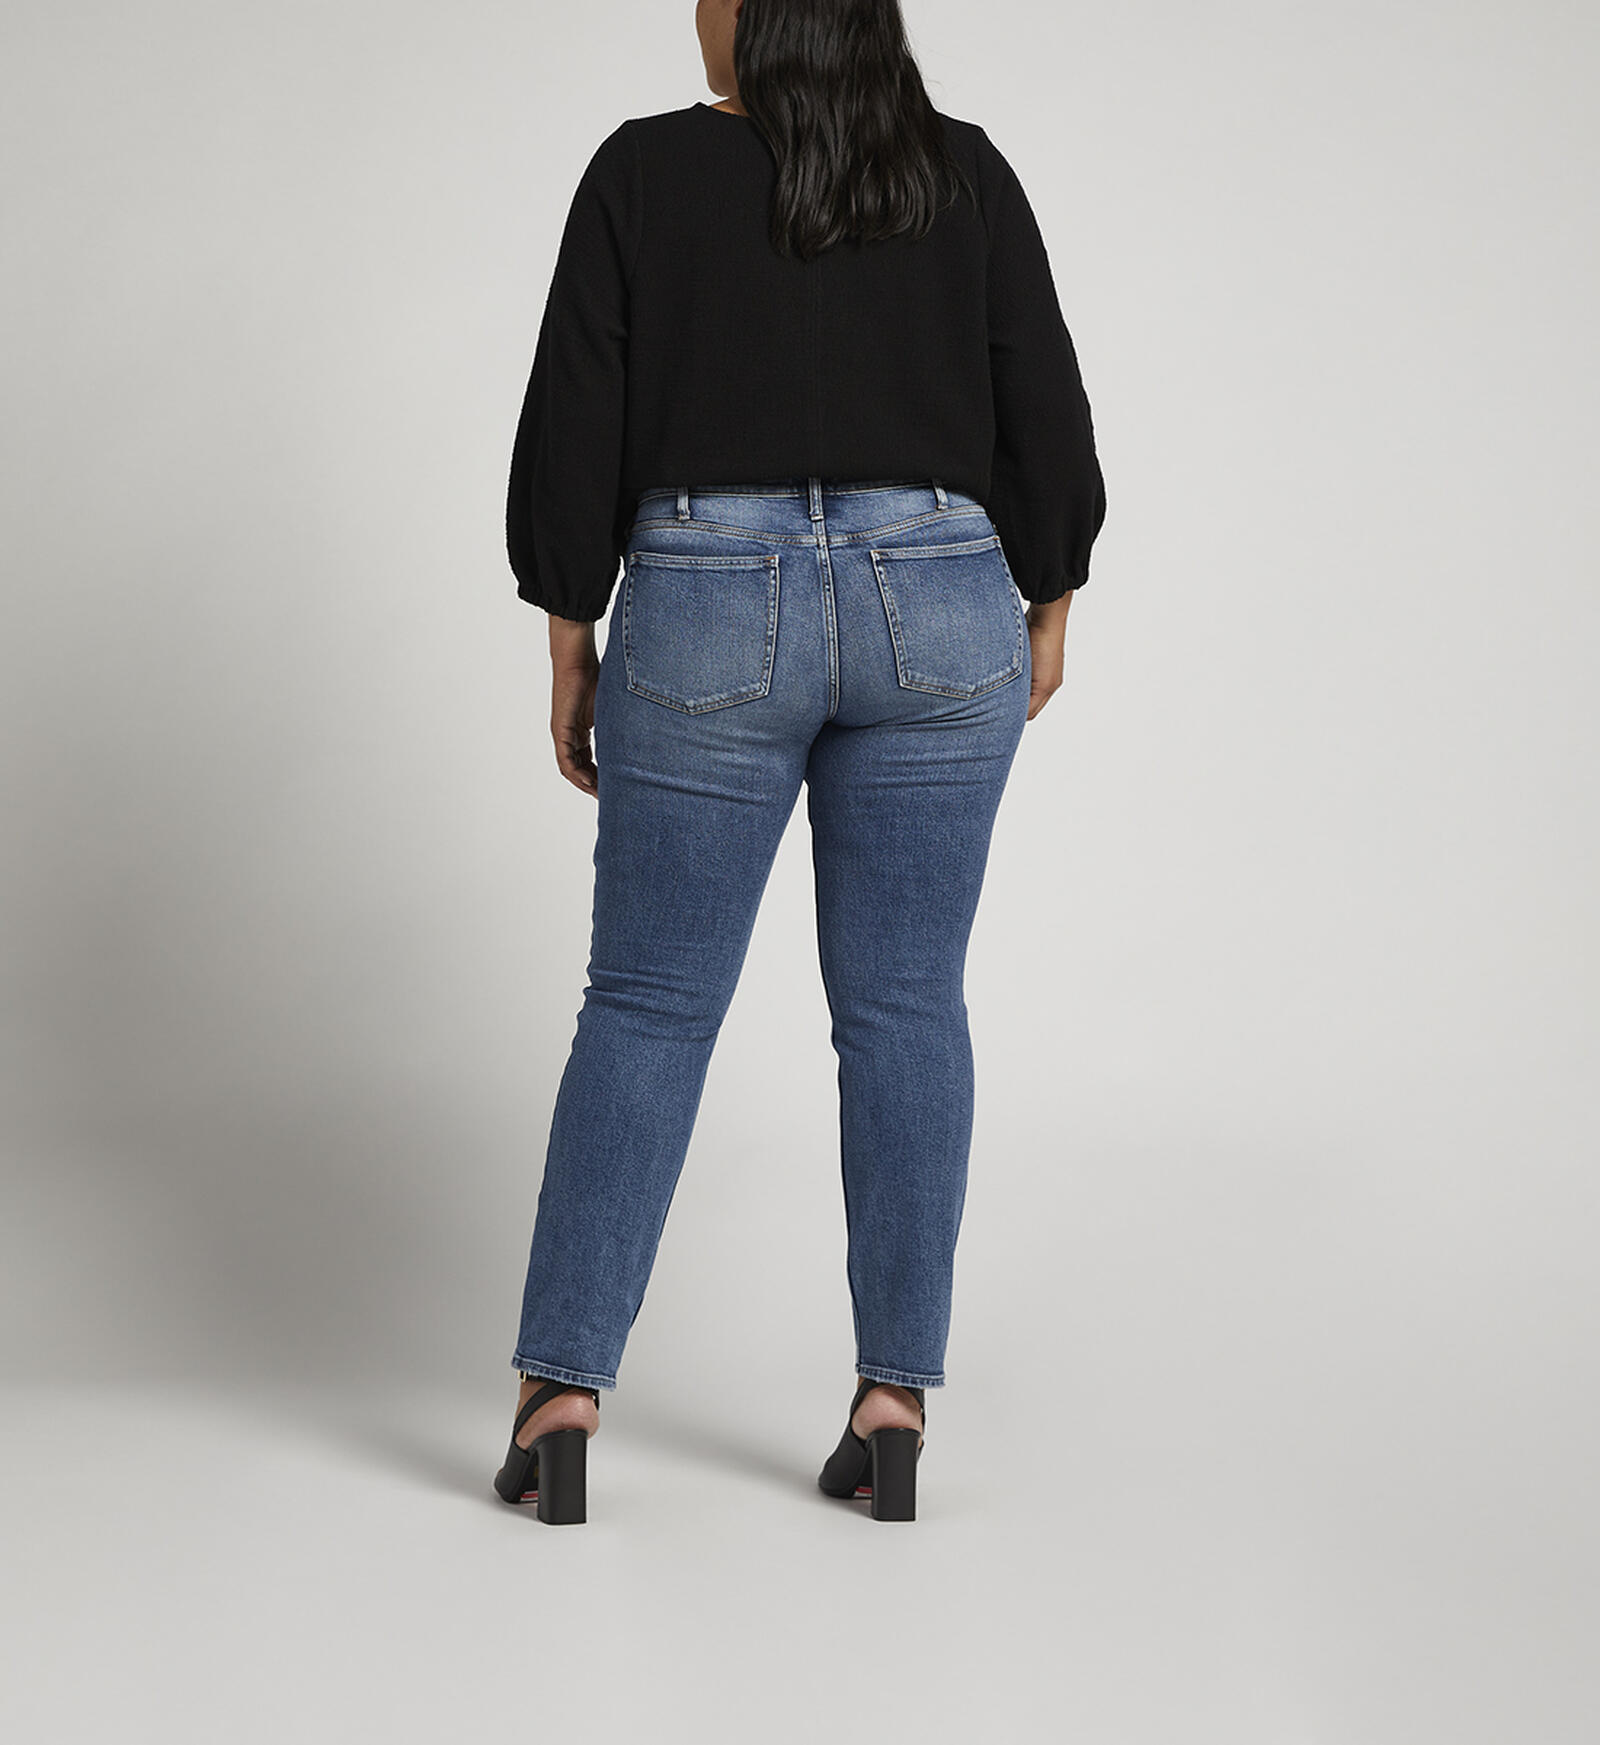 Buy Most Wanted Mid Rise Straight Leg Jeans Plus Size for CAD 62.00